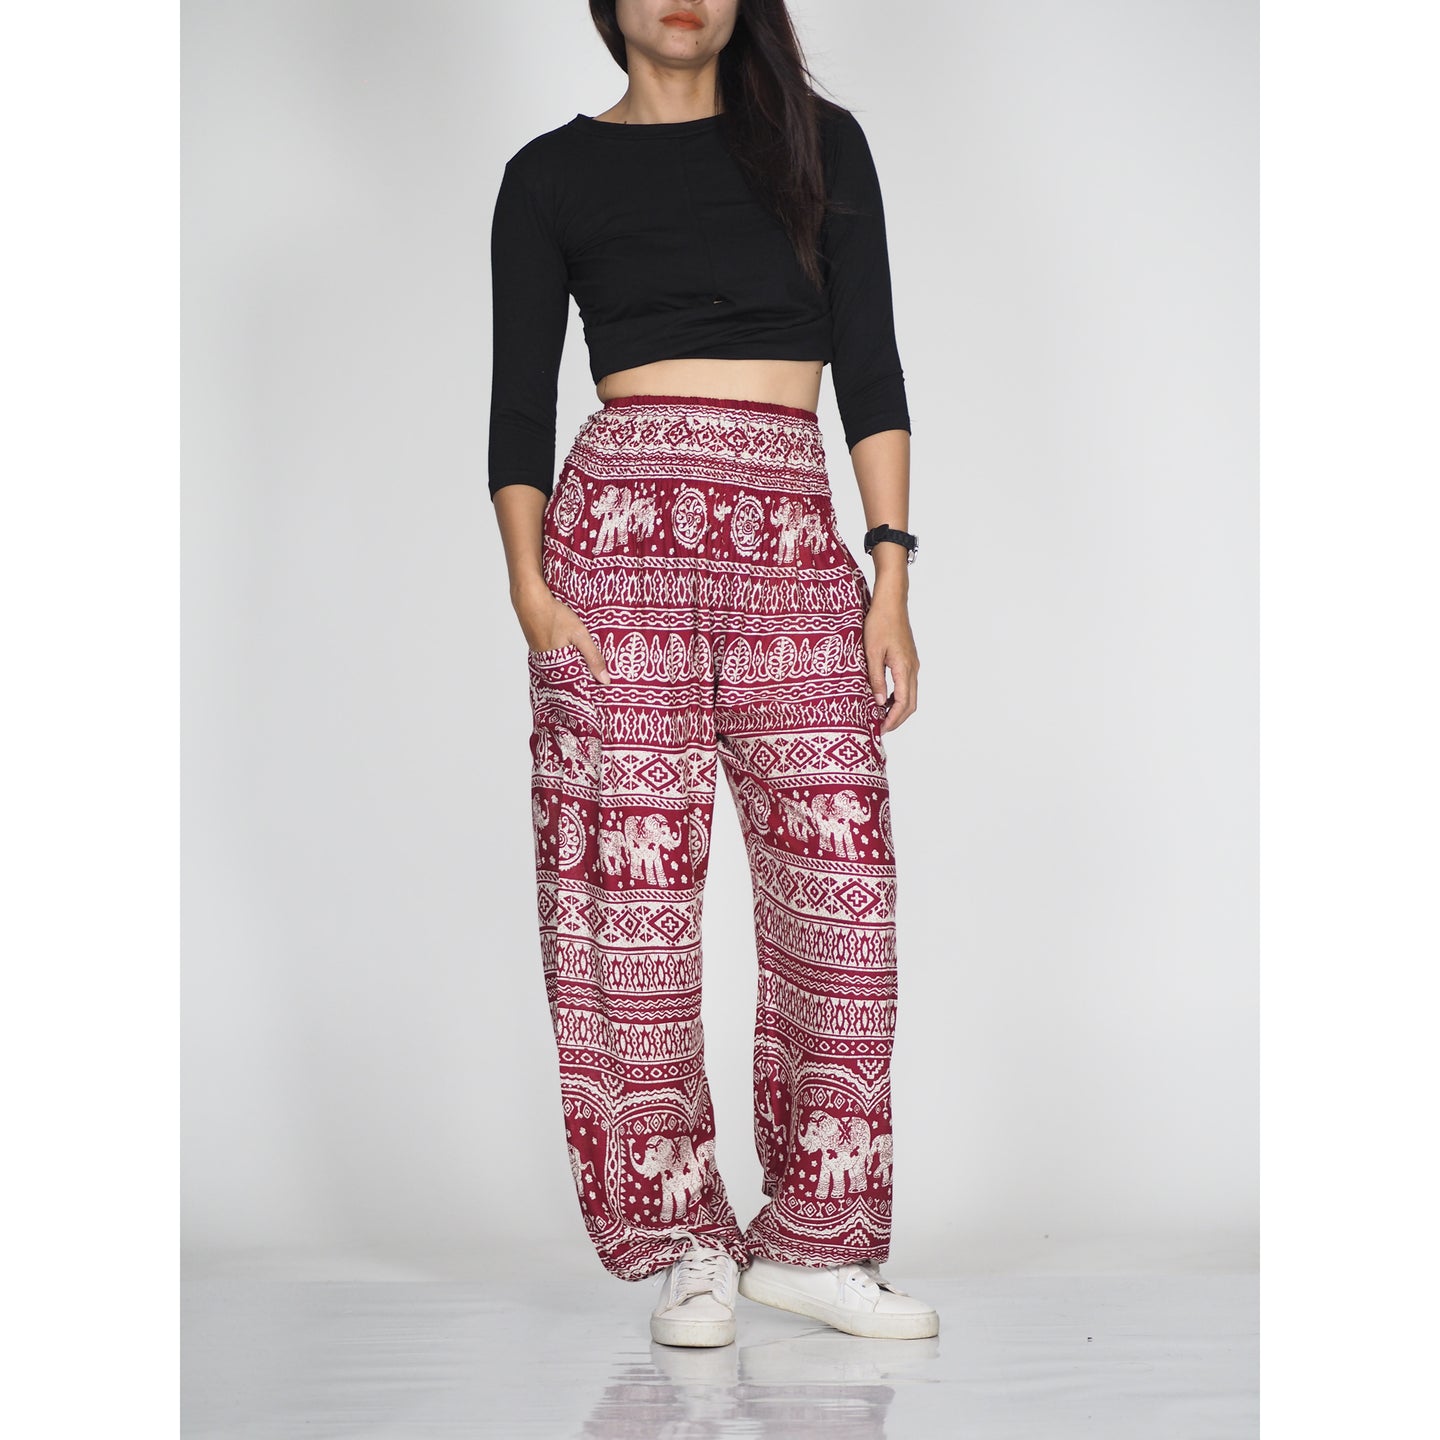 Elephant temple 14 women harem pants in red PP0004 020014 05